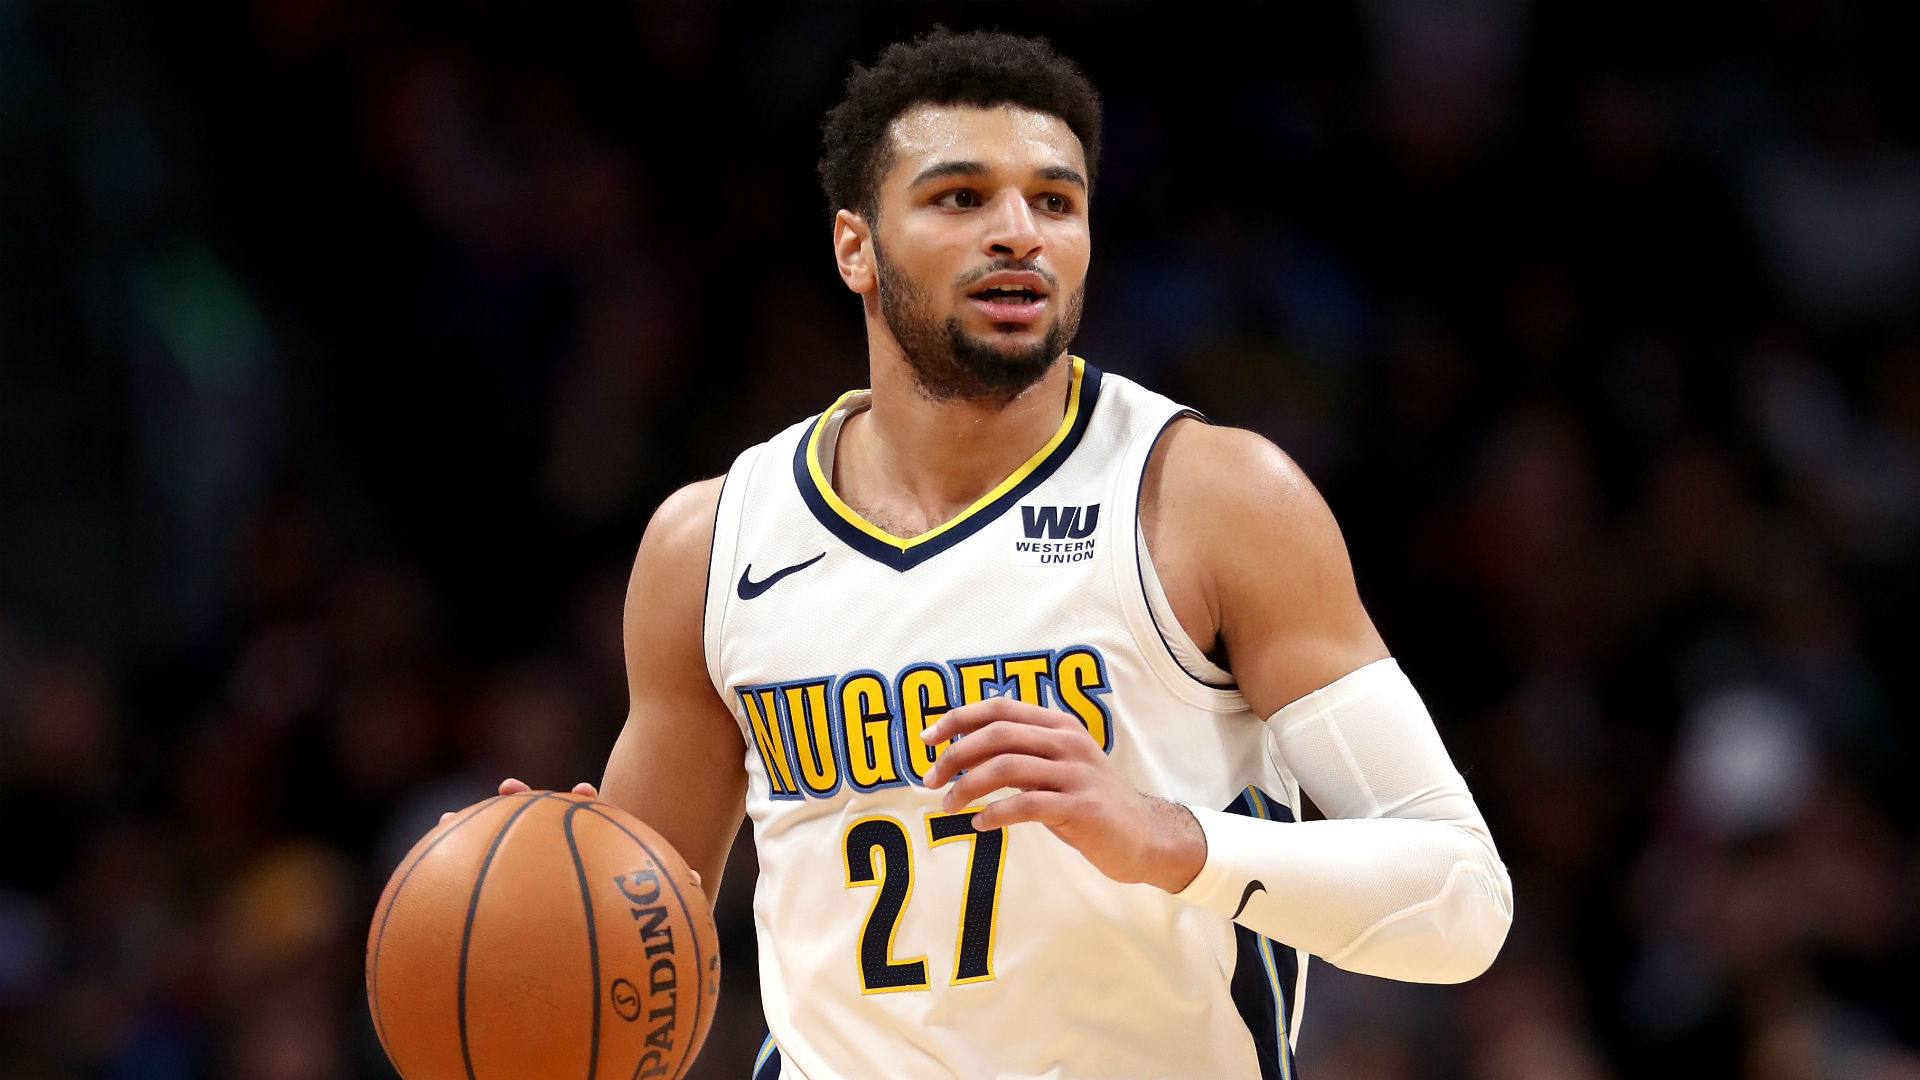 Jamal Murray 'From a small city in Canada' to one of NBA's top